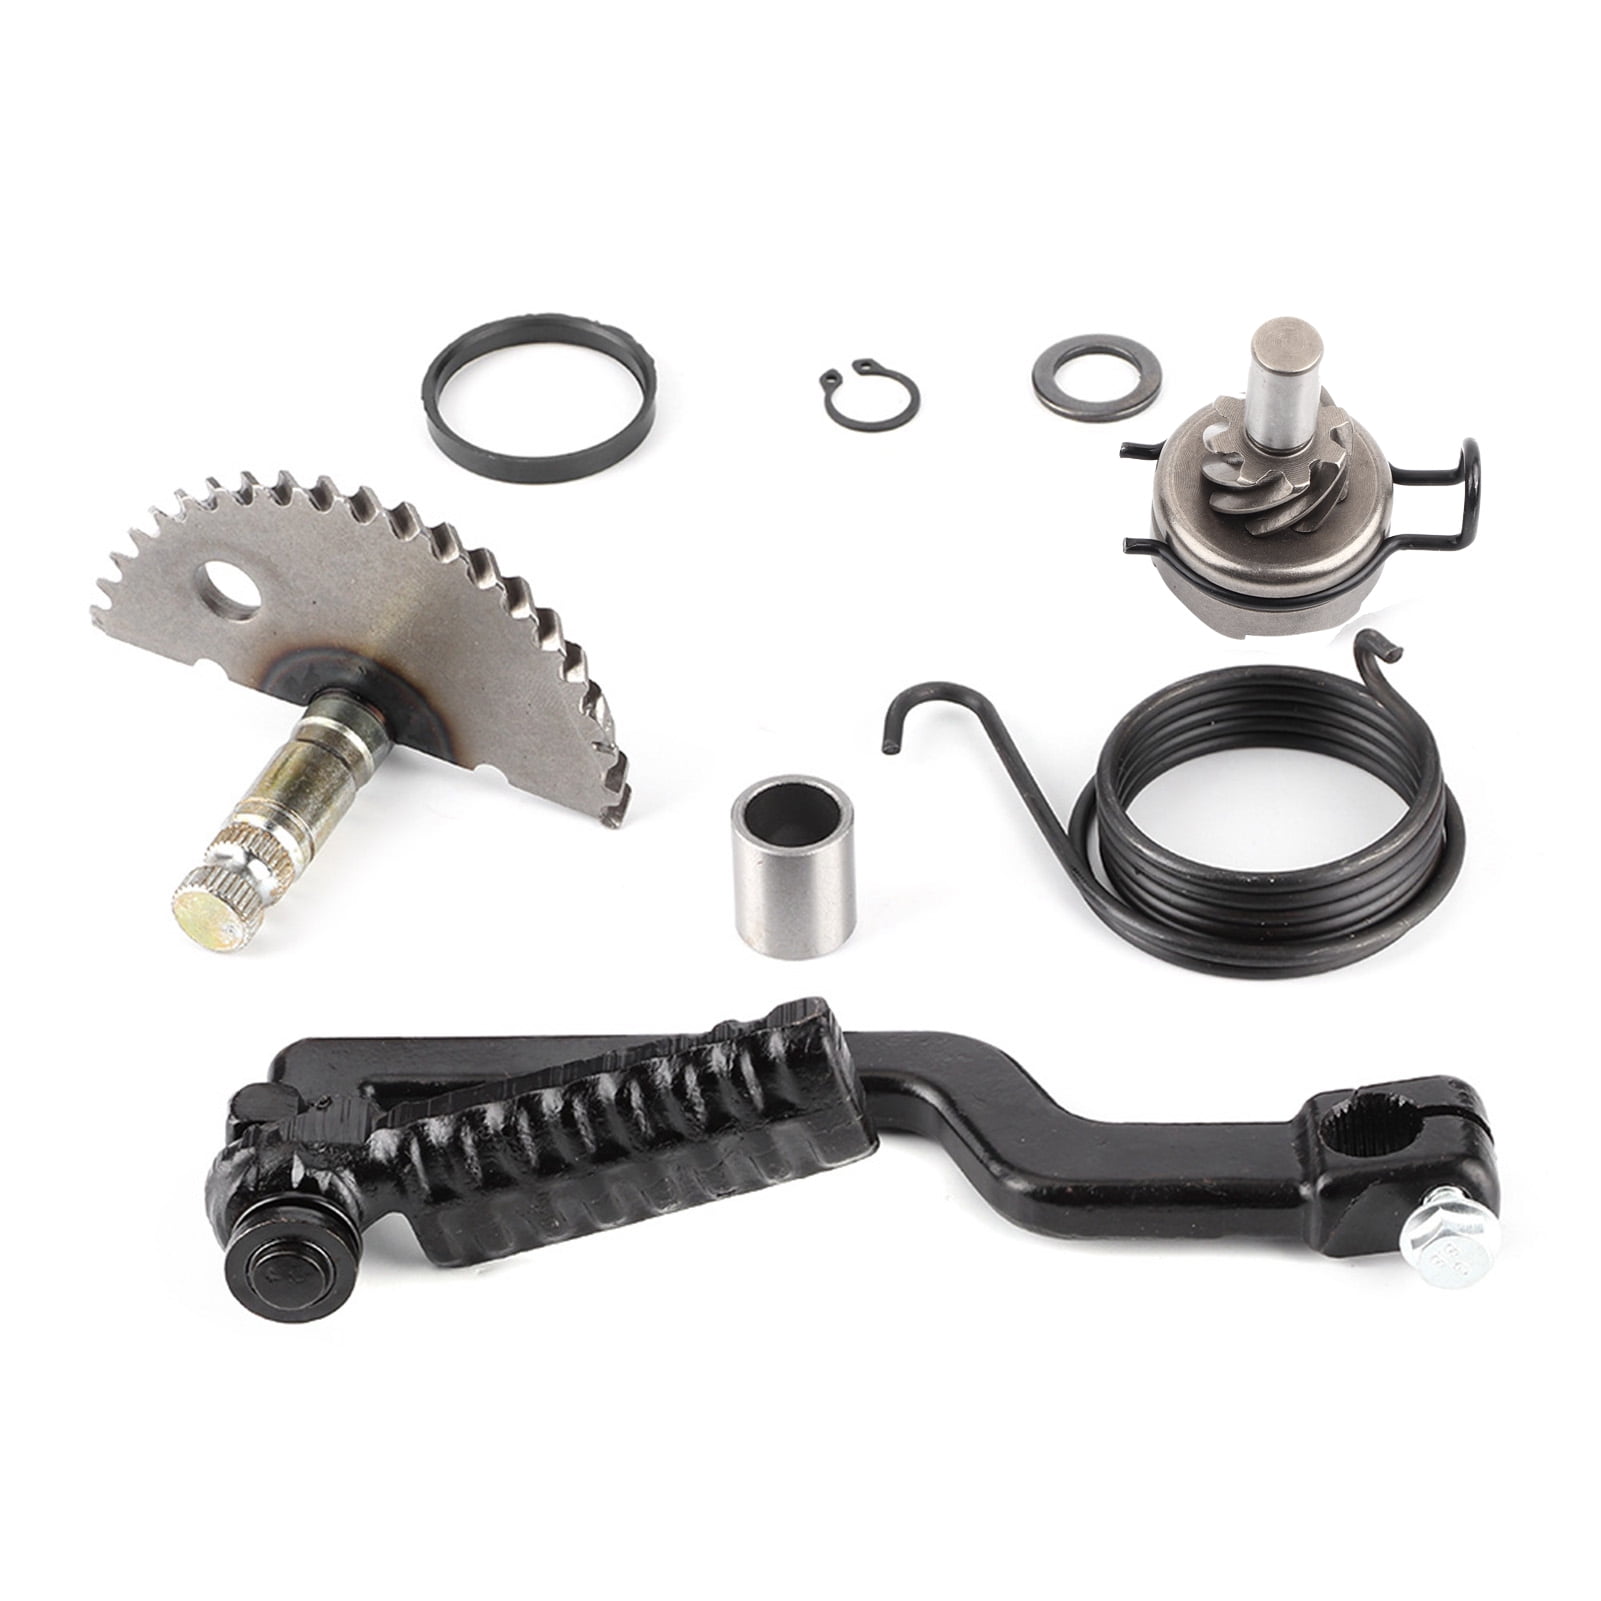 Engine Start Gear Moped Kick Start Lever Idler Shaft Gear Spring Scooter Kick Starter Assembly Set Fit for GY6 49CC 50CC 80CC 100CC Scooter 